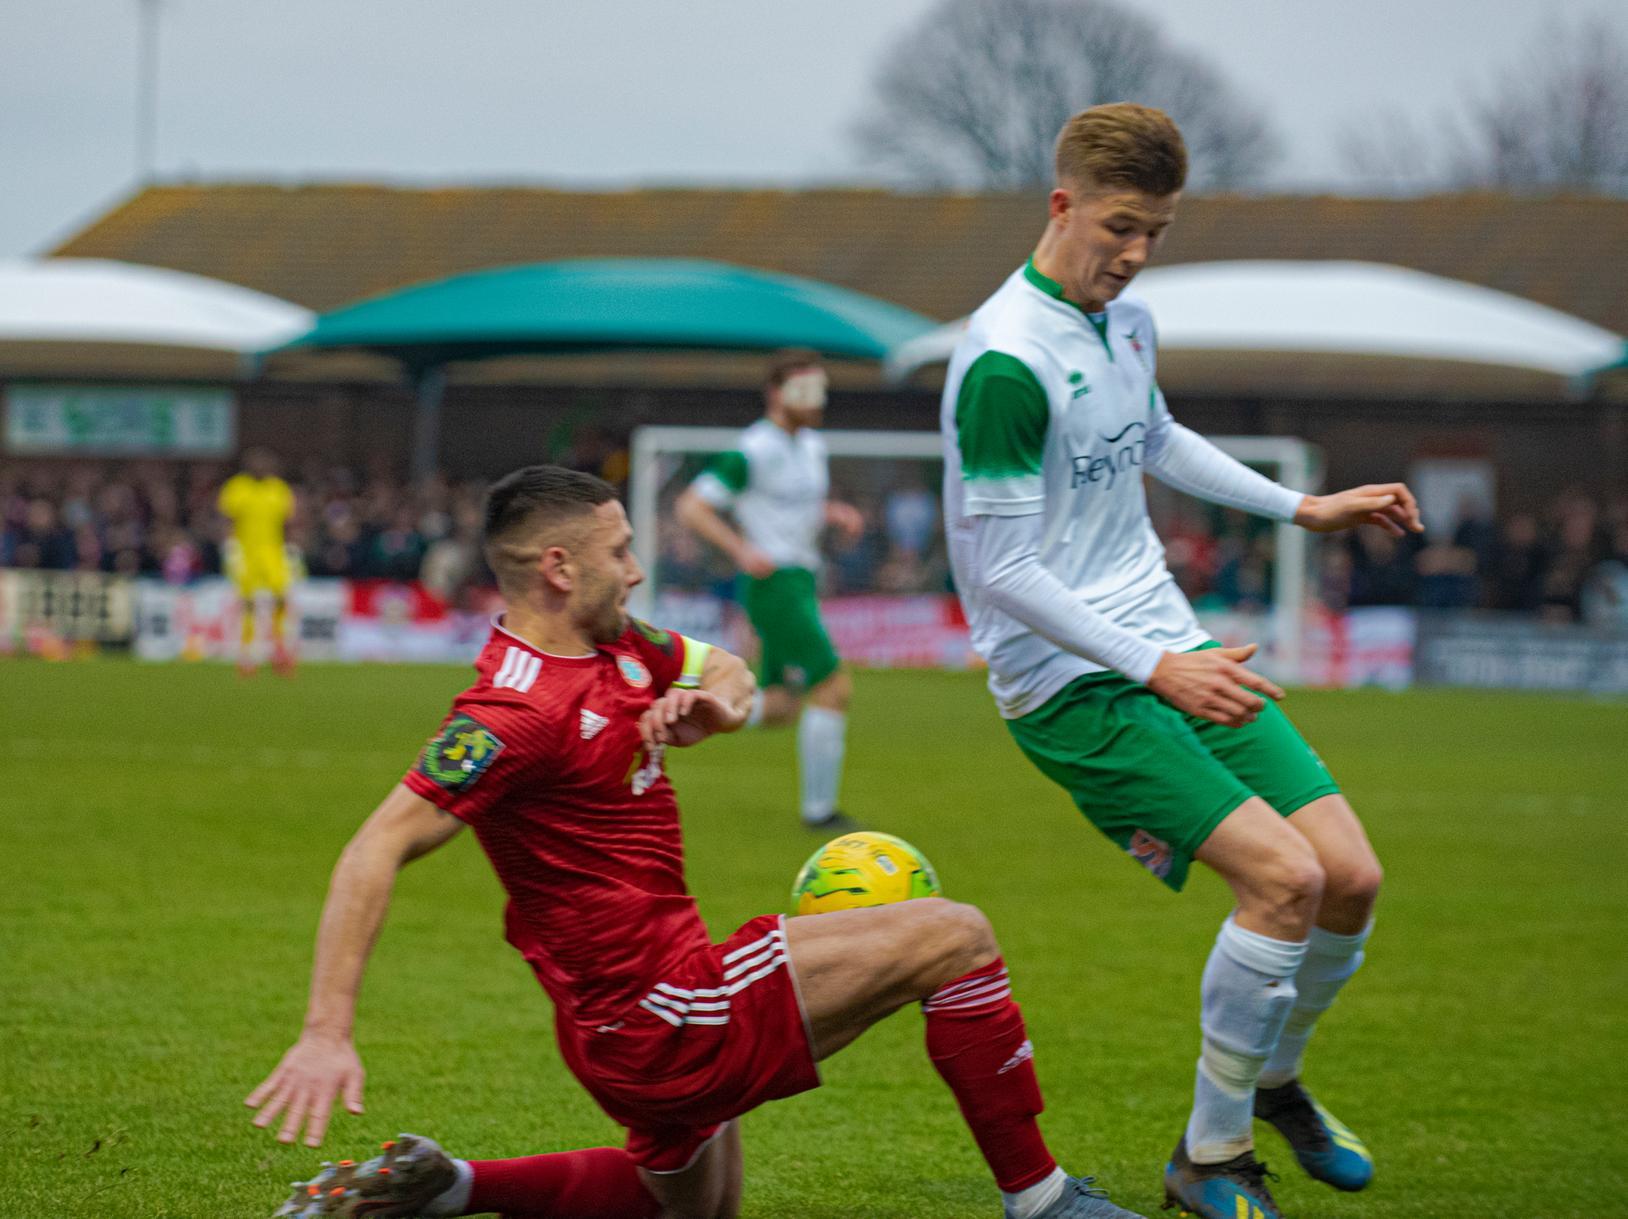 Action from the Rocks v Worthing / Picture: Tommy McMillan